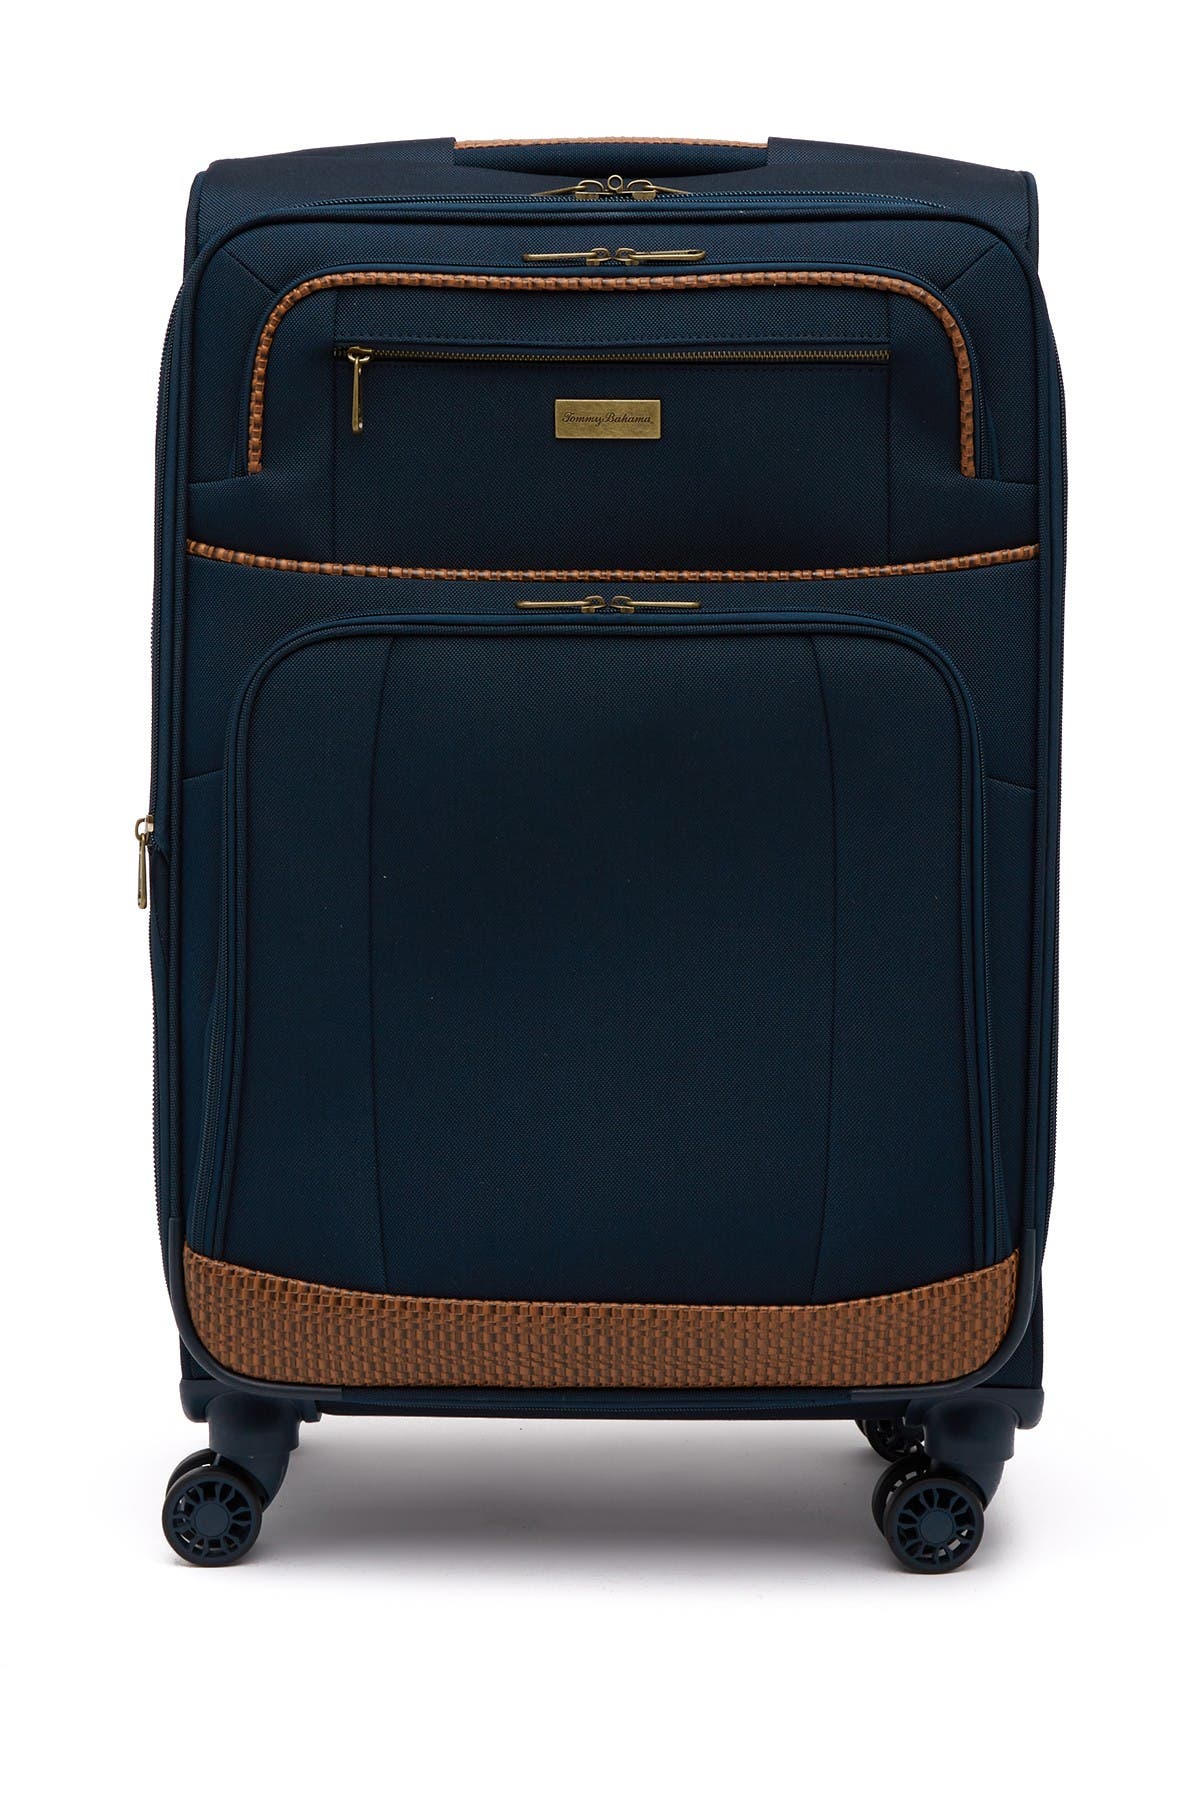 Tommy Bahama Luggage Top Sellers, UP TO 65% OFF | www.aramanatural.es